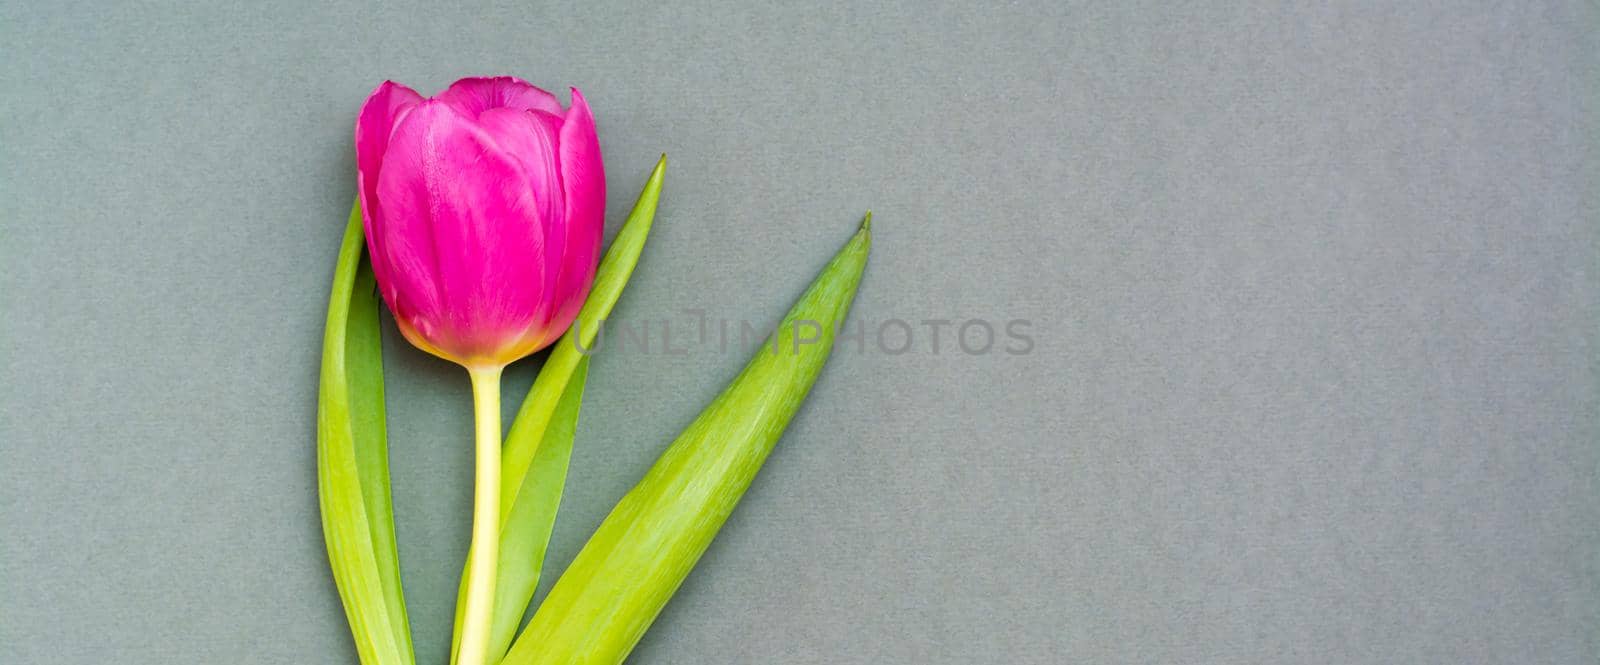 Lonely pink tulip with green leaves on a solid dark background. Copy space. Web banner by Aleruana